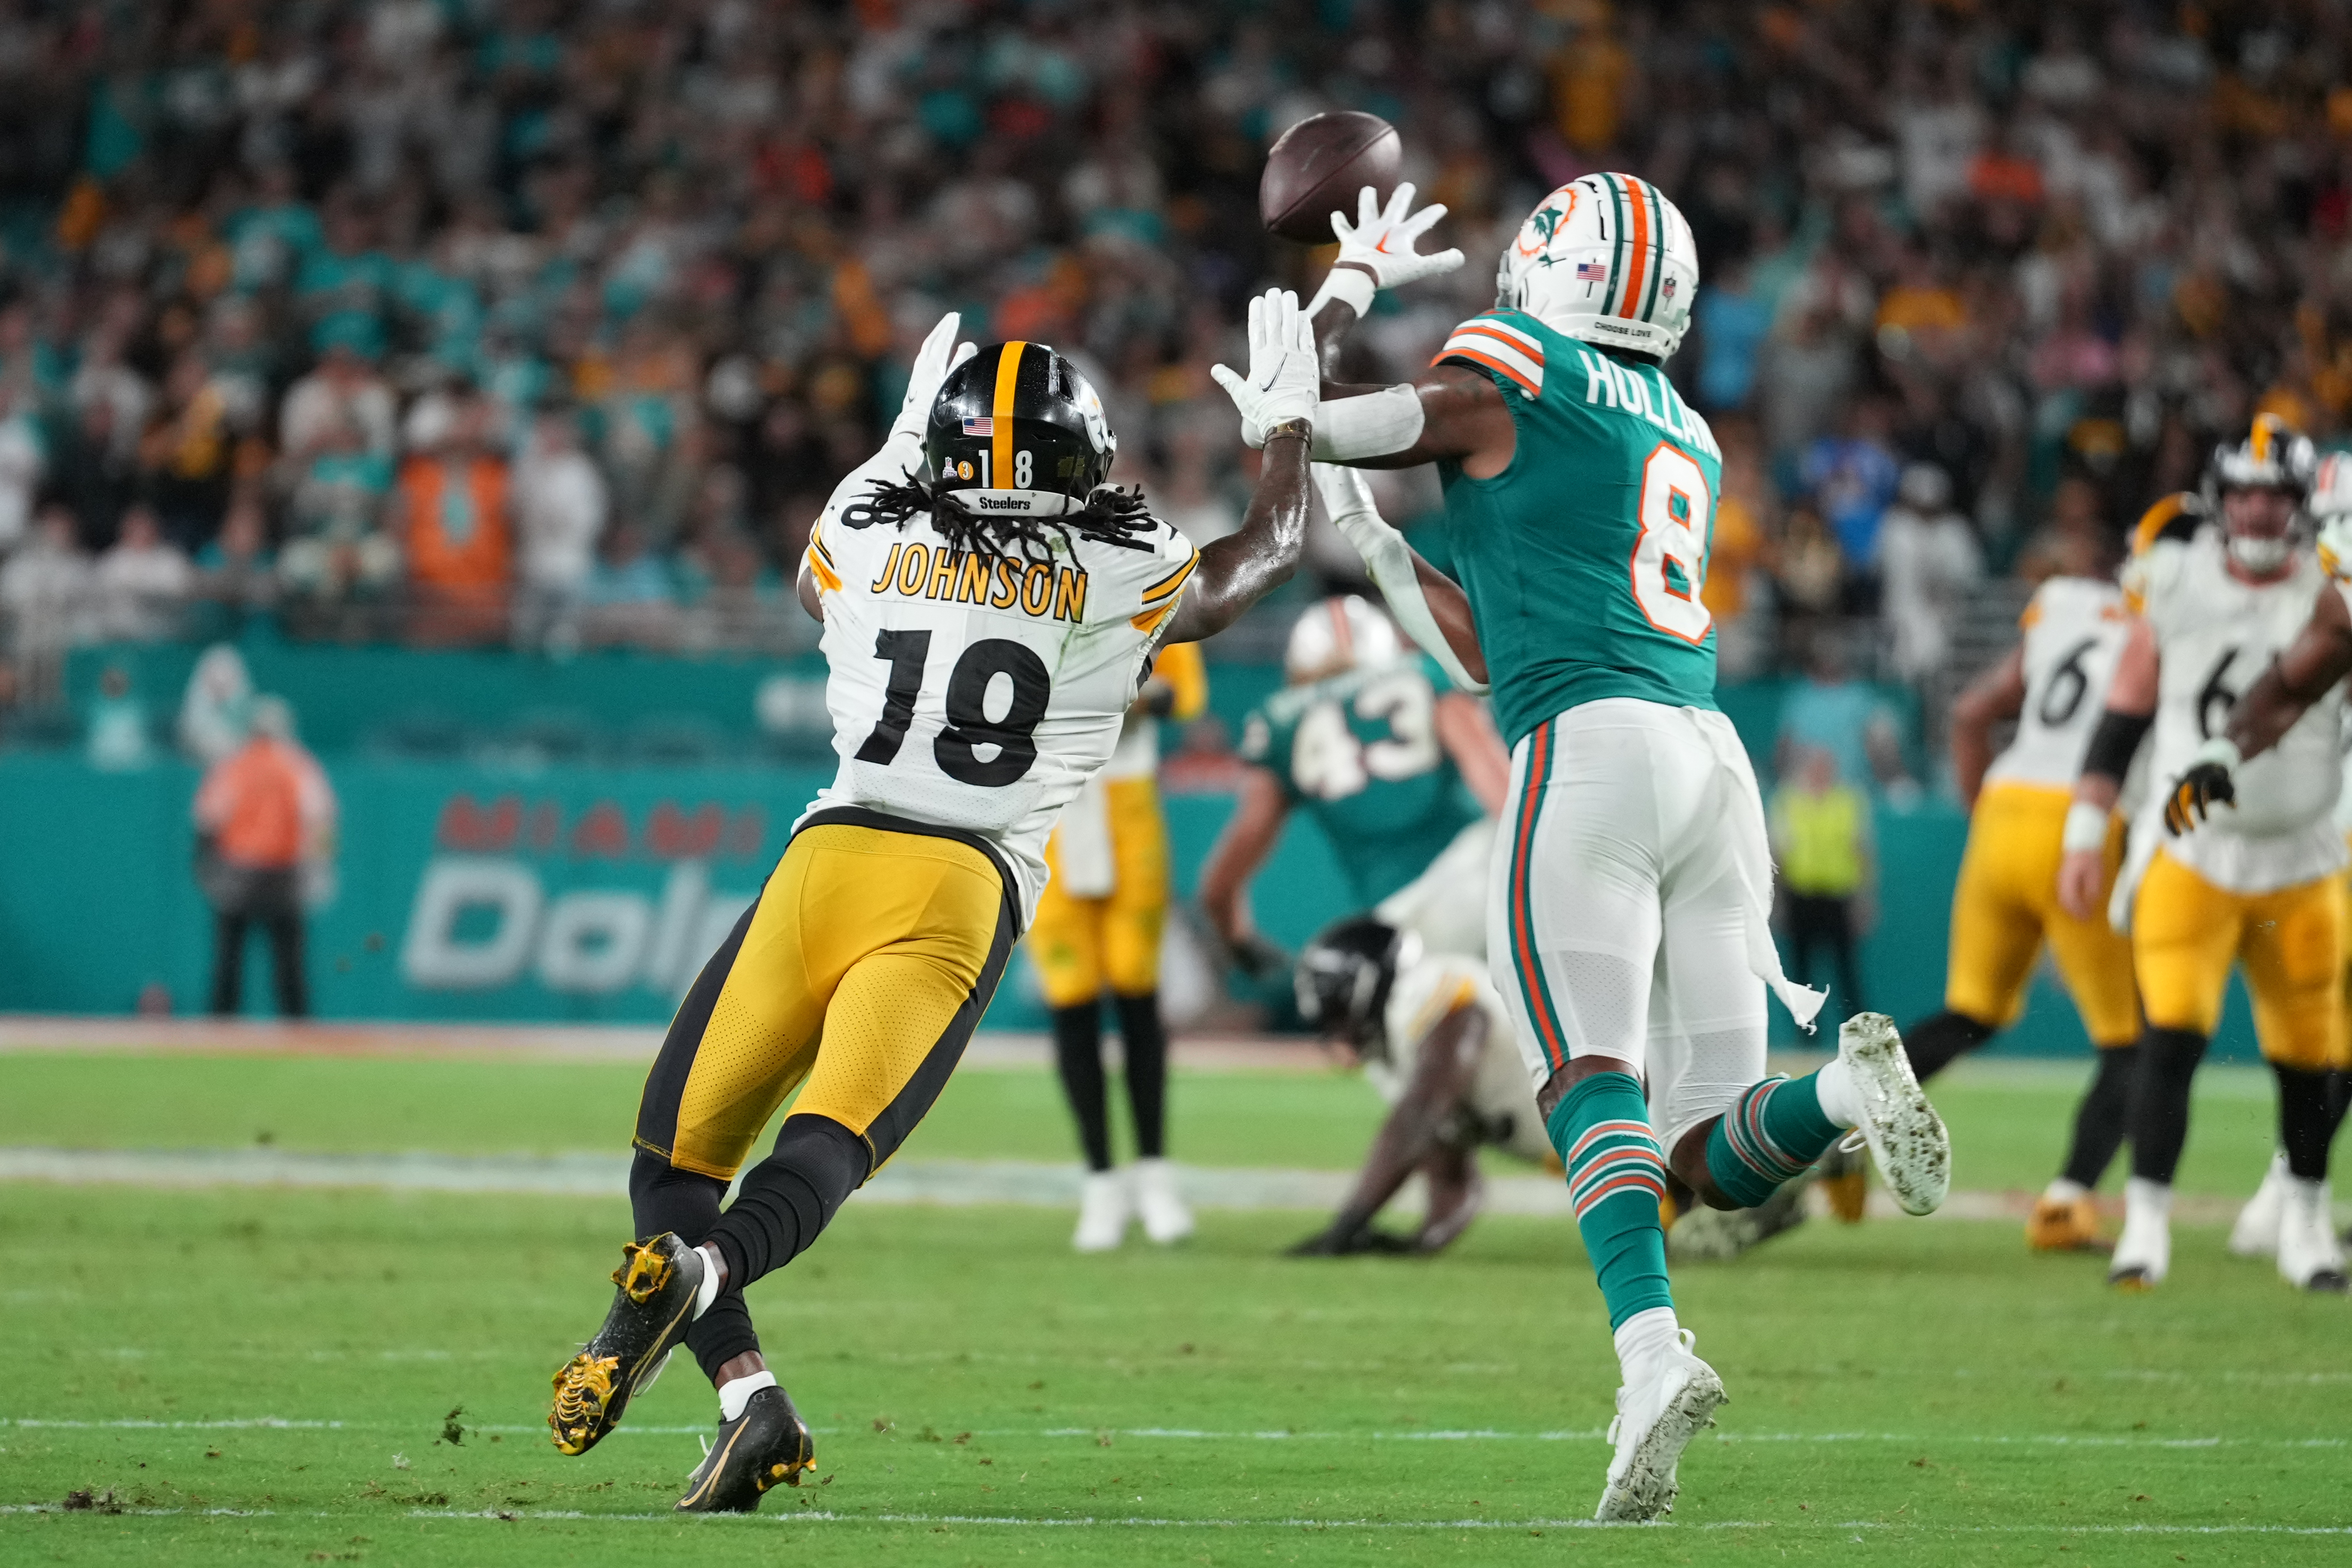 NFL: OCT 23 Steelers at Dolphins